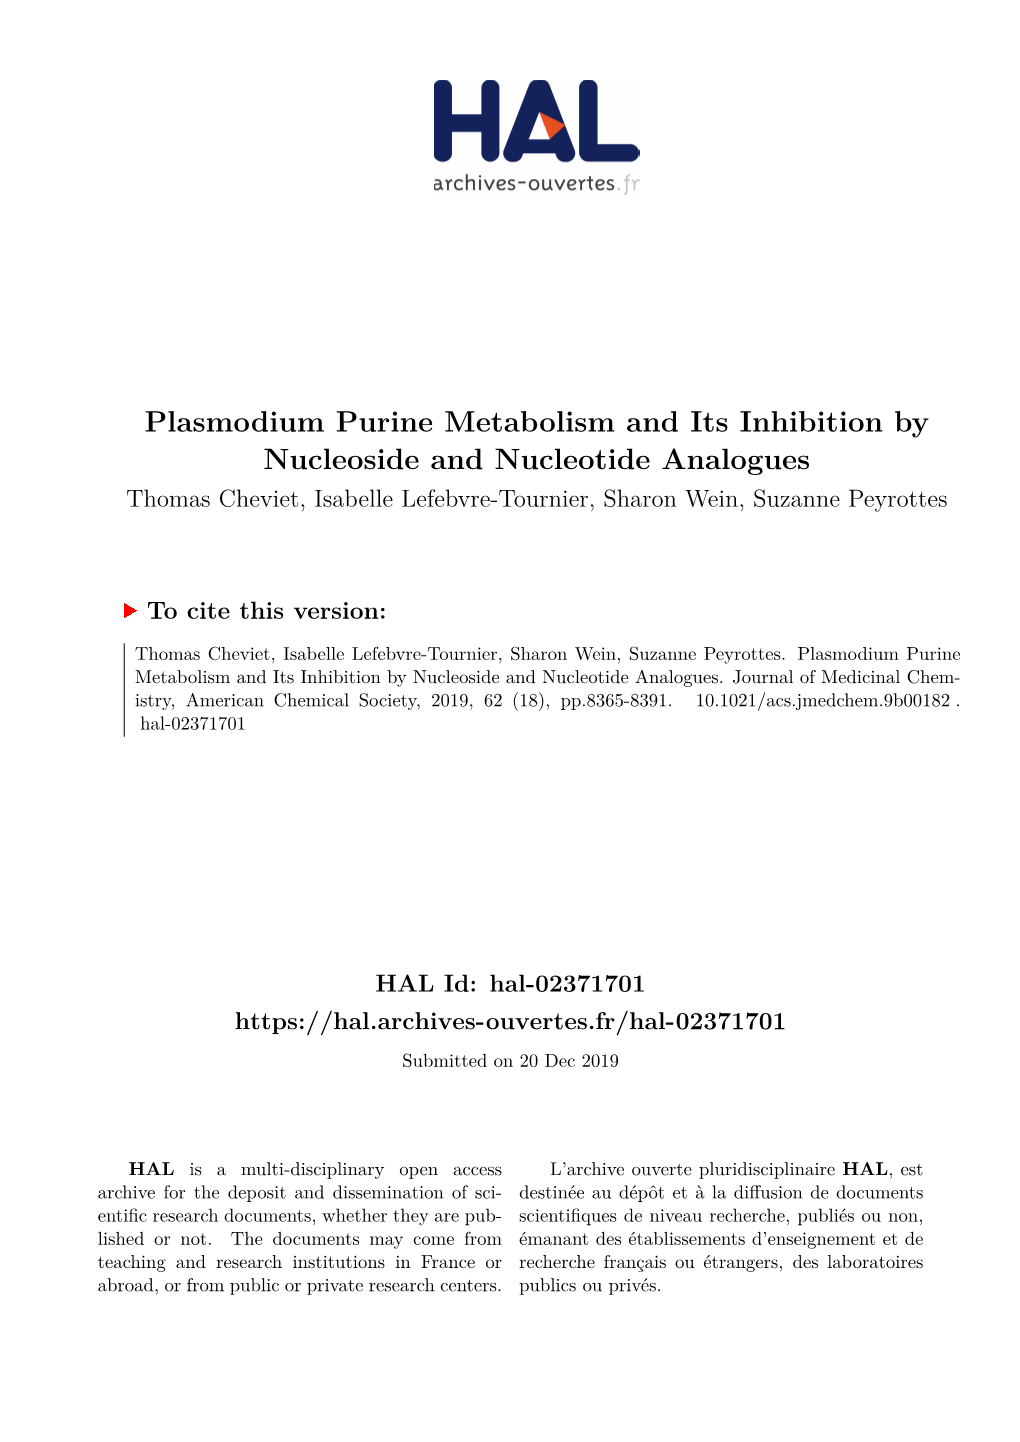 Plasmodium Purine Metabolism and Its Inhibition by Nucleoside and Nucleotide Analogues Thomas Cheviet, Isabelle Lefebvre-Tournier, Sharon Wein, Suzanne Peyrottes